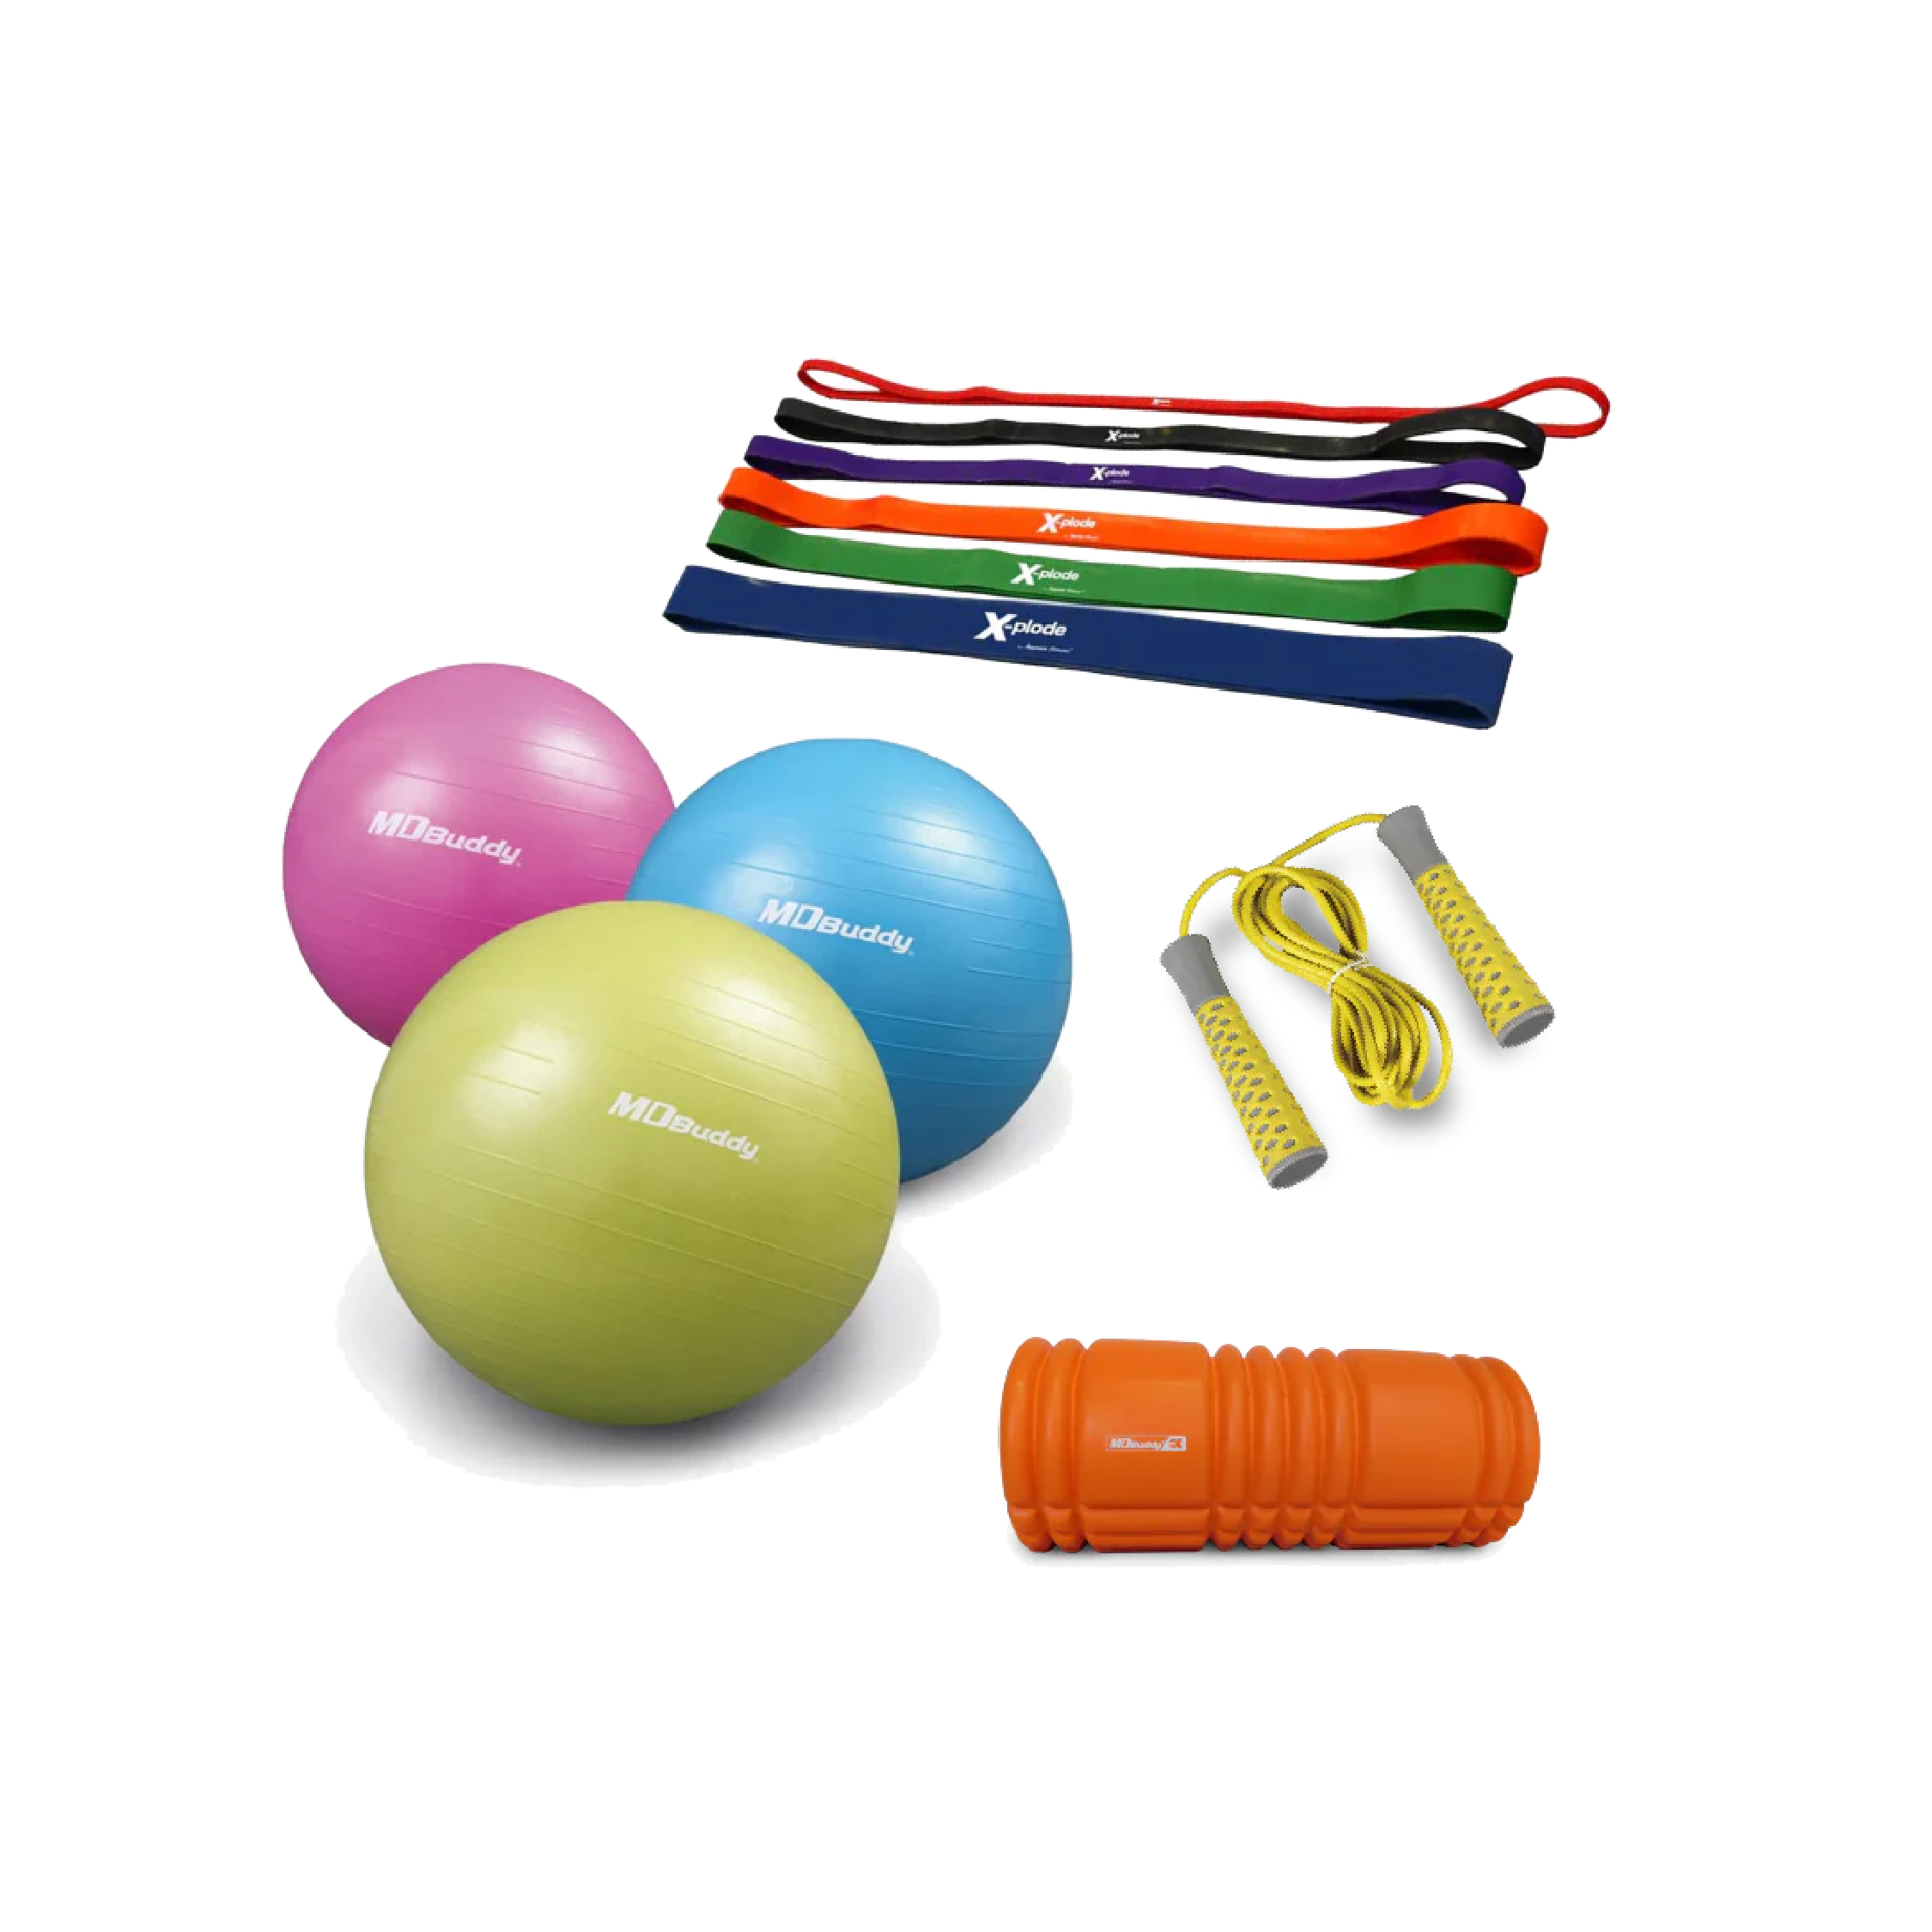 Gym accessories: jump ropes, resistance bands, foam rollers.